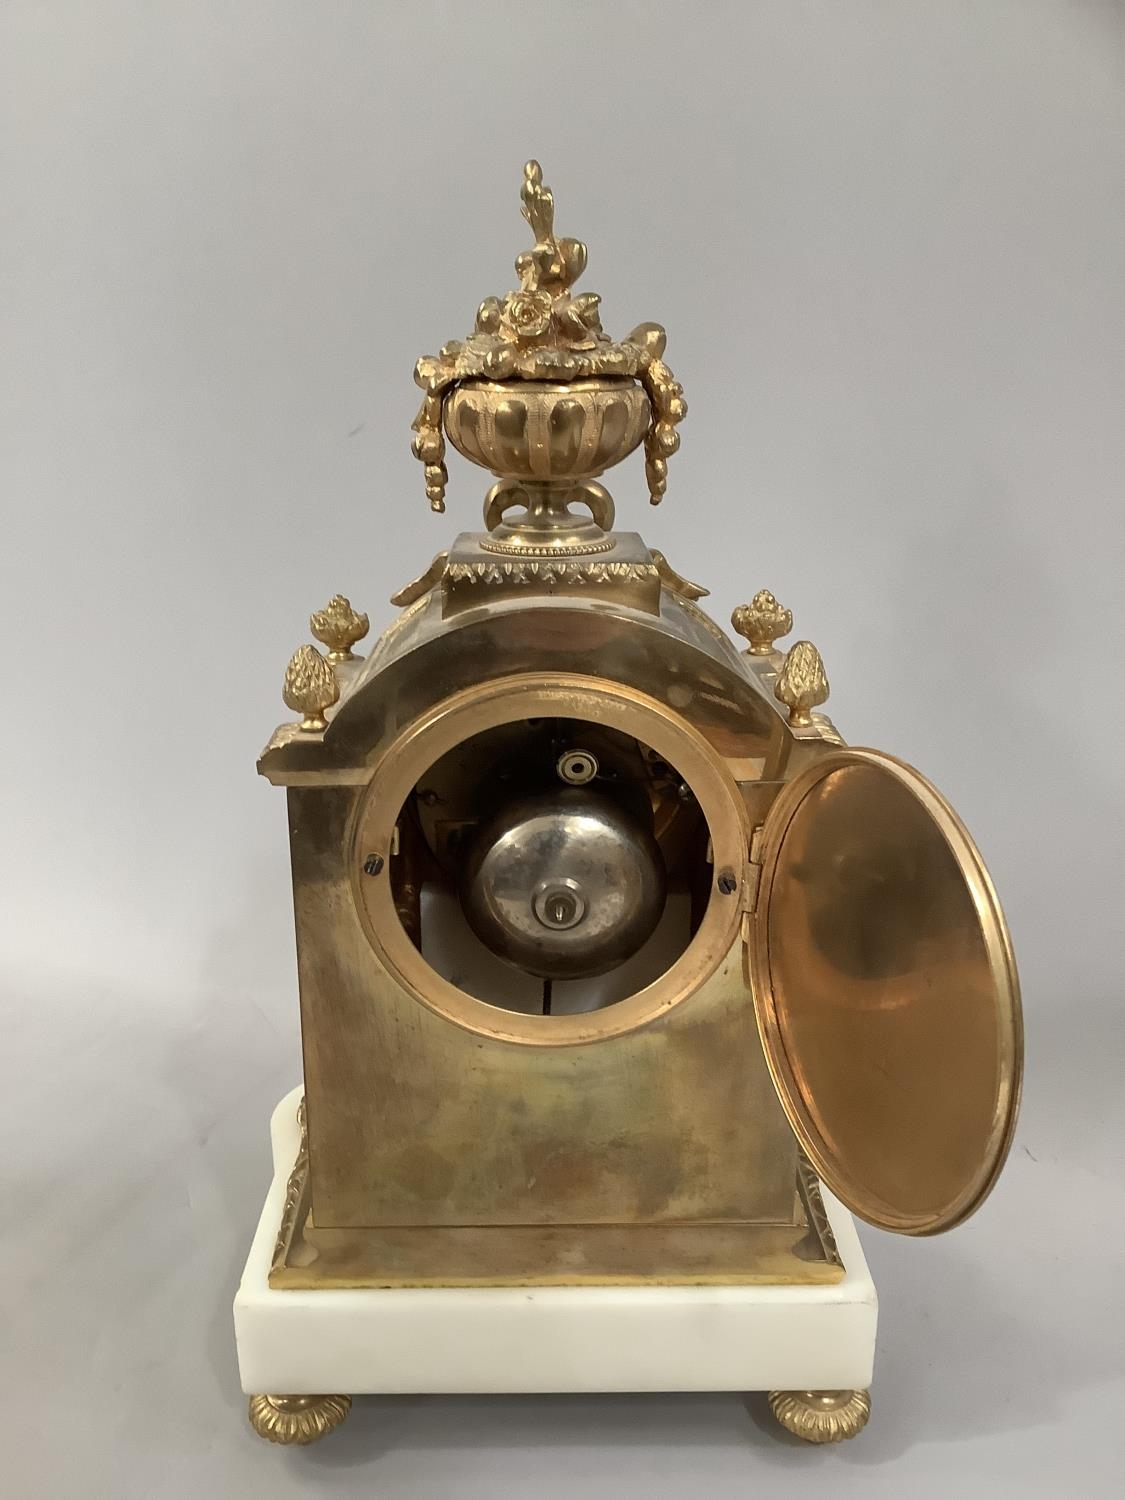 A 19TH CENTURY FRENCH ORMOLU AND ALABASTER CLOCK, with 8 day pendulum movement striking on one bell, - Image 3 of 5